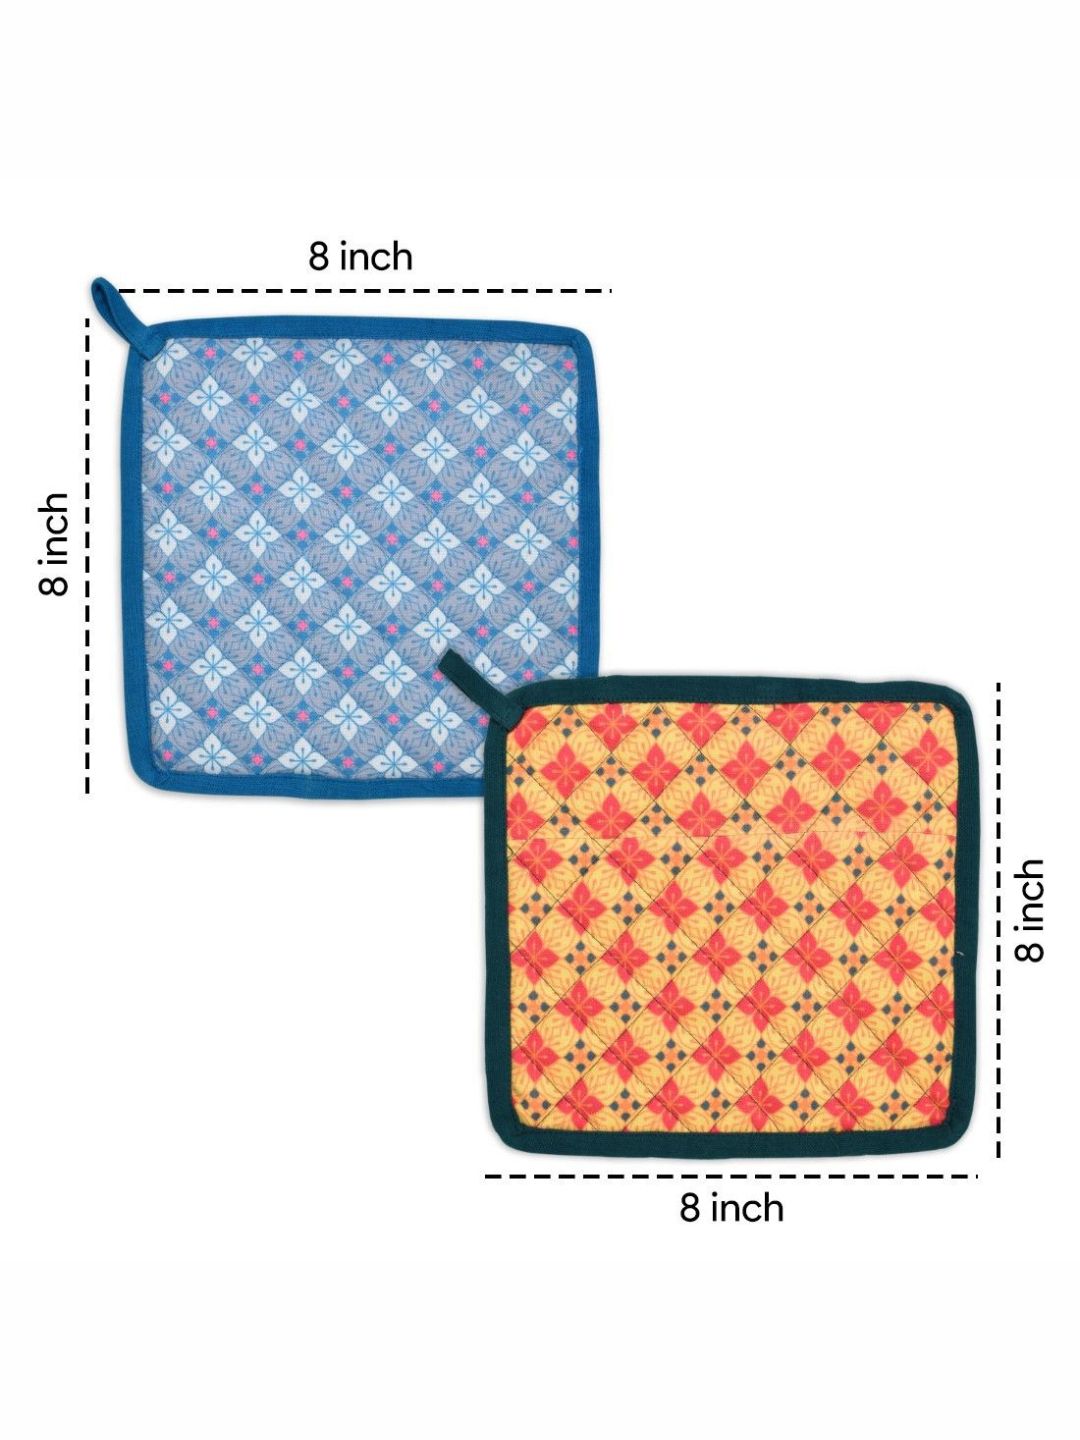 Indigifts Oven Microwave Pot Holders Set of 2| 8 x 8 Inch| Kitchen Cooking & Baking – Heat Resistant| Thick & Safe| Protection of Hands from Hot Utensils| Grill | Fabric- Cotton Duck | Poly Matty